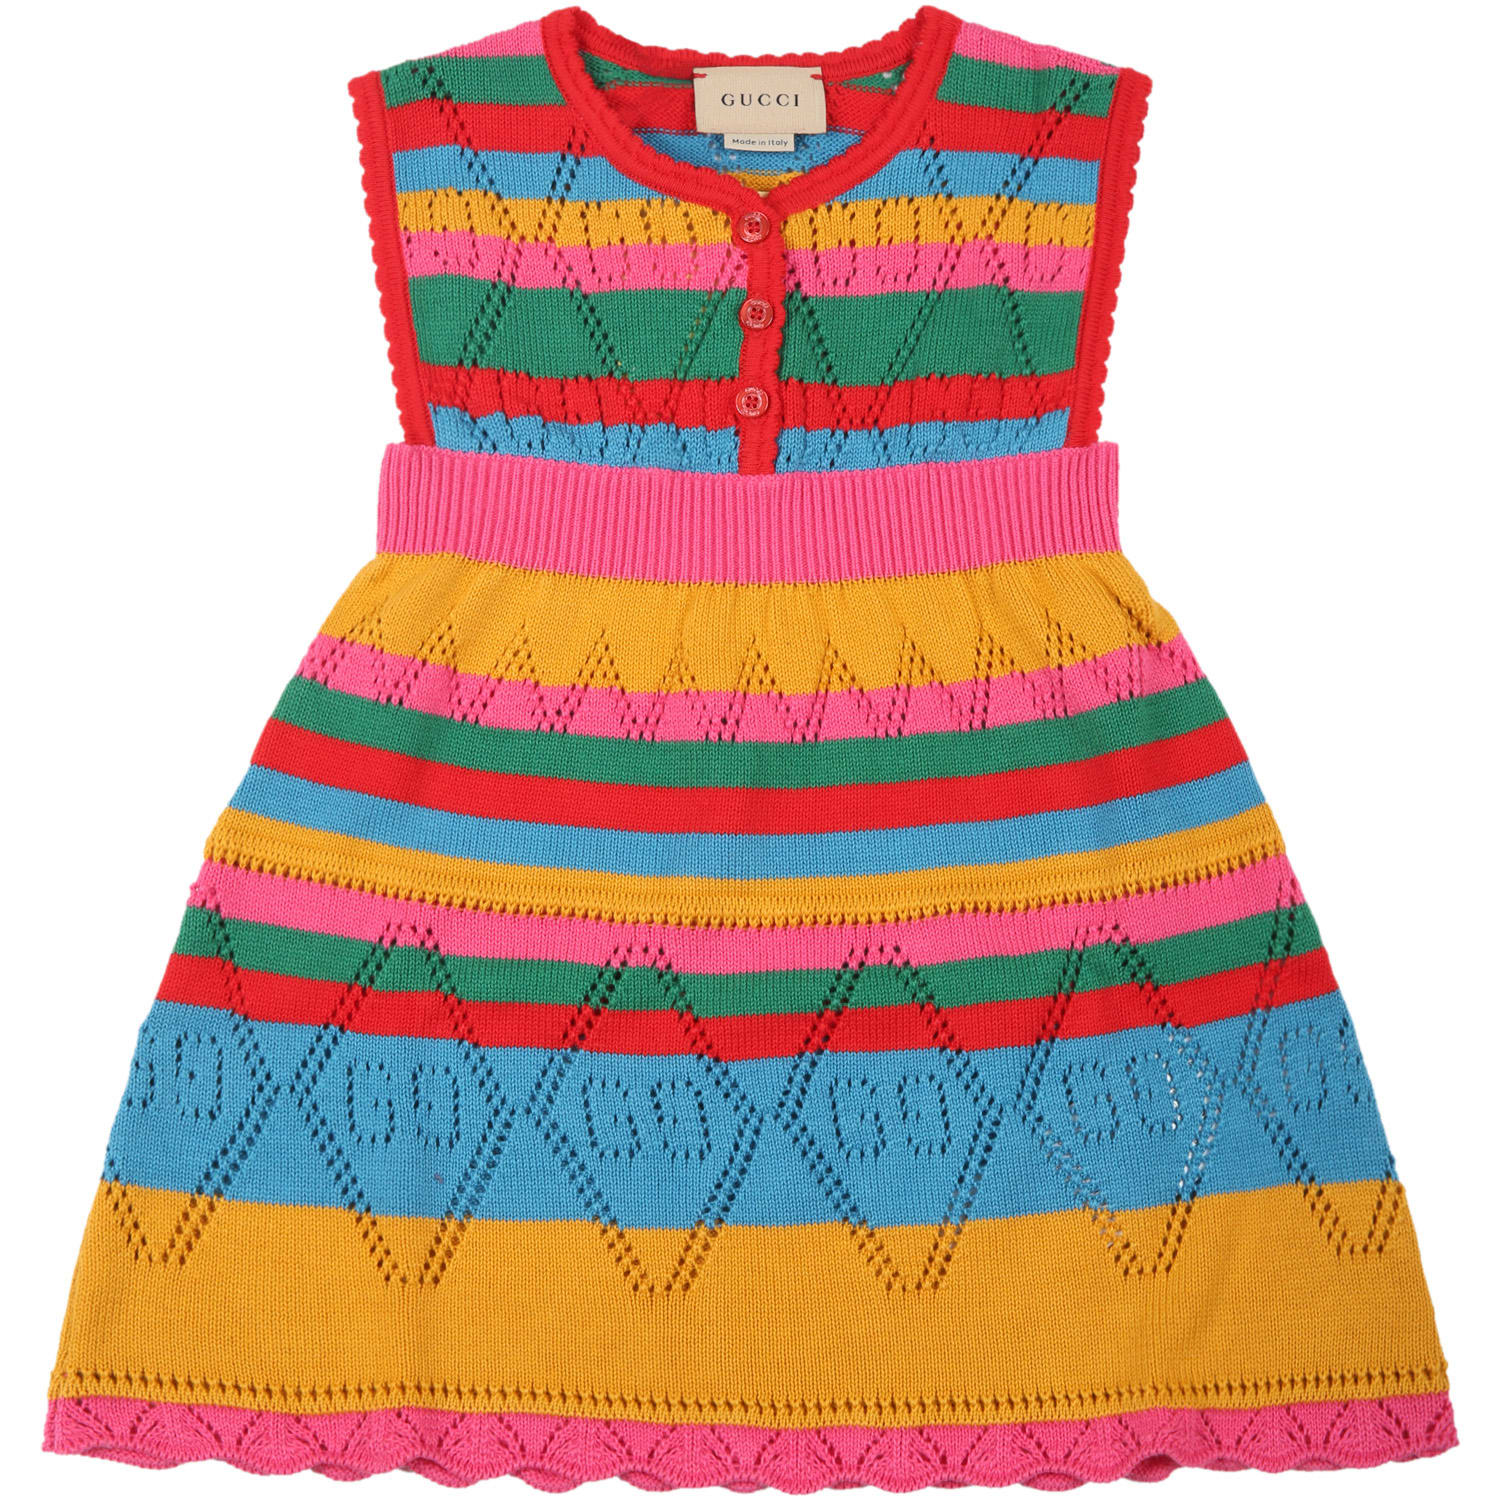 Gucci Multicolor Dress For Baby Girl With Iconic Gg